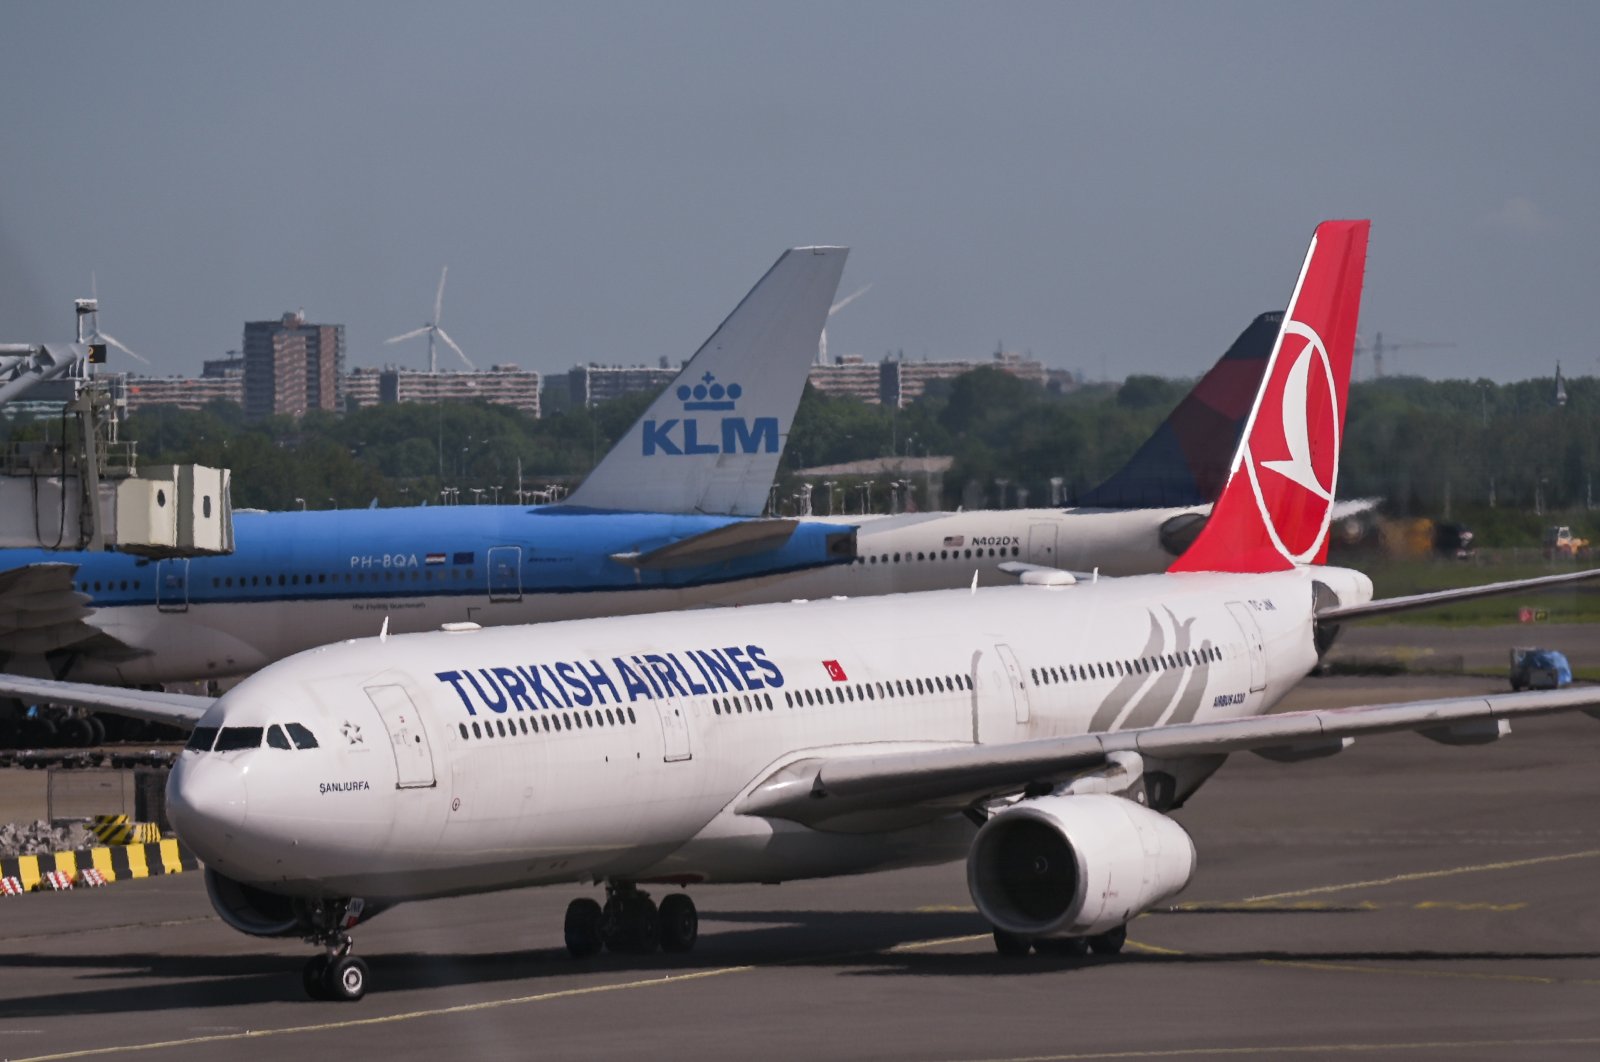 Turkish Airlines aircraft is seen at the Schiphol Airport, Amsterdam, Netherlands, May 22, 2022. (Reuters Photo)